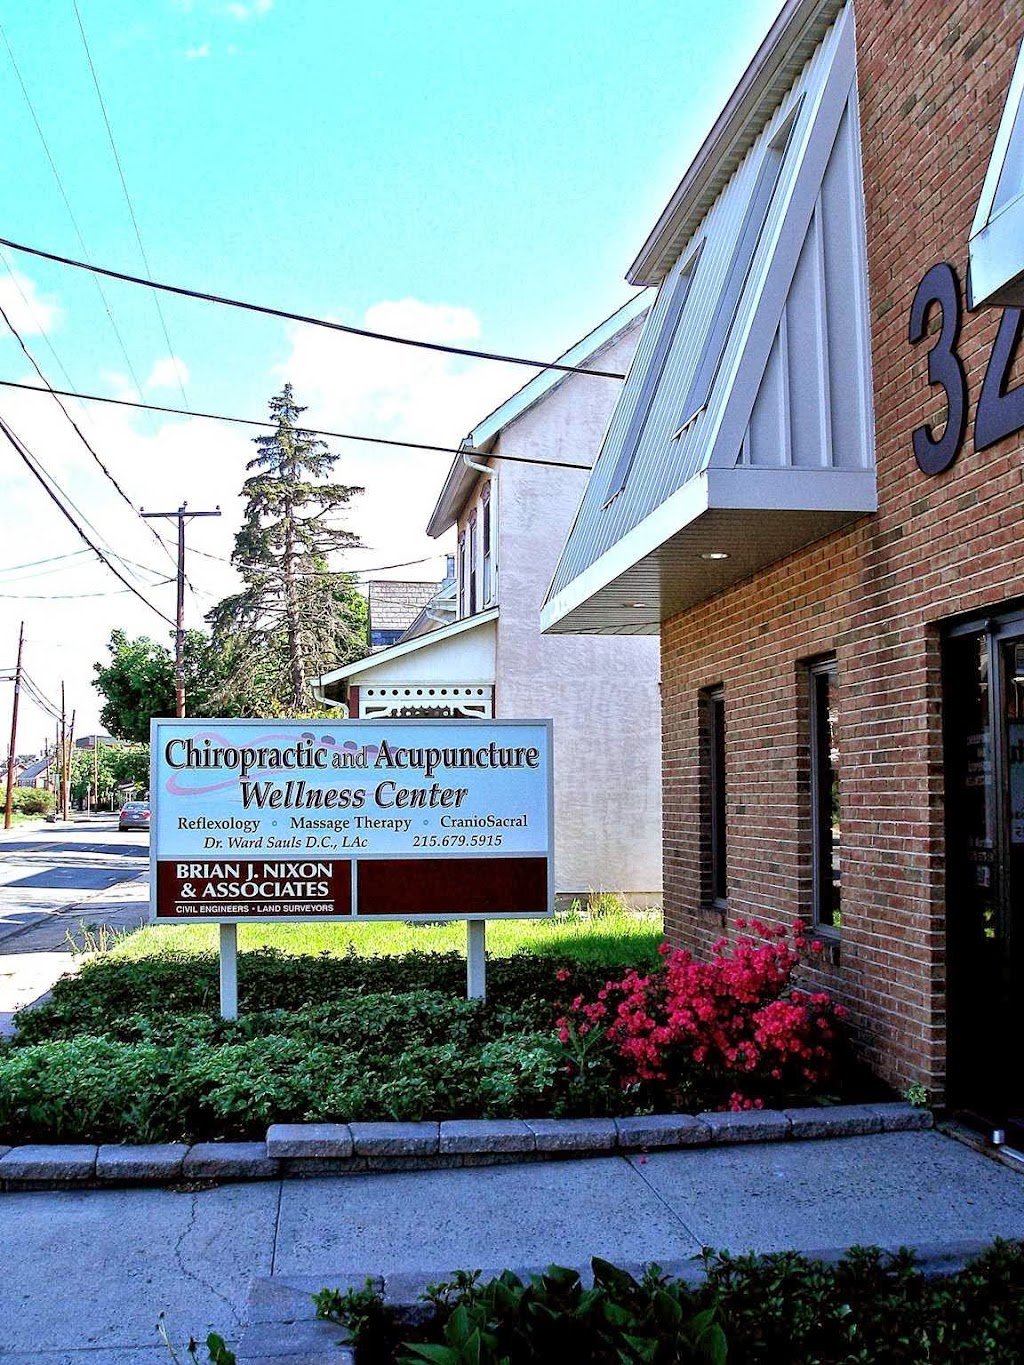 Chiropractic and Acupuncture Wellness Center | 326 Main St, Red Hill, PA 18076 | Phone: (215) 679-5915